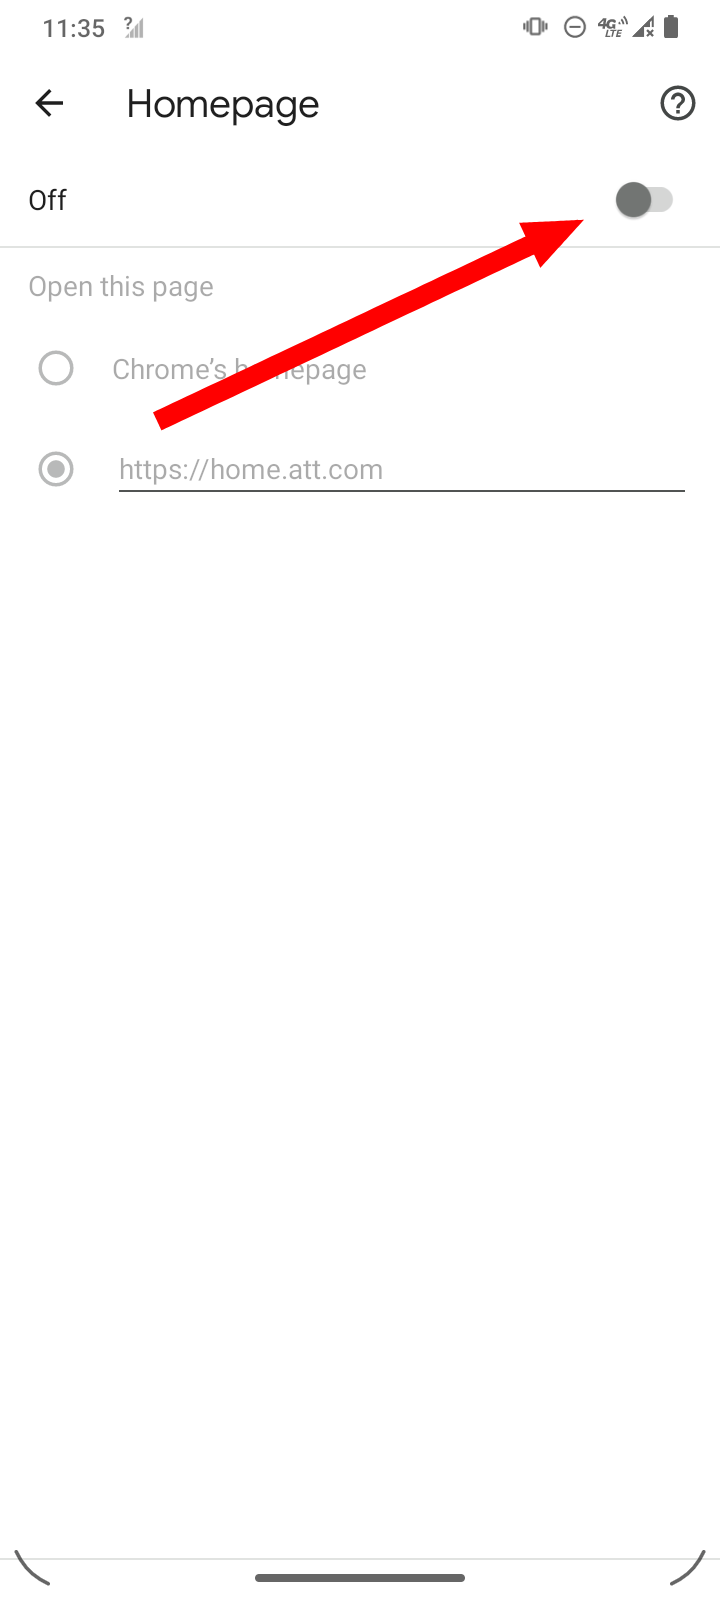 Enable chrome homepage on Android